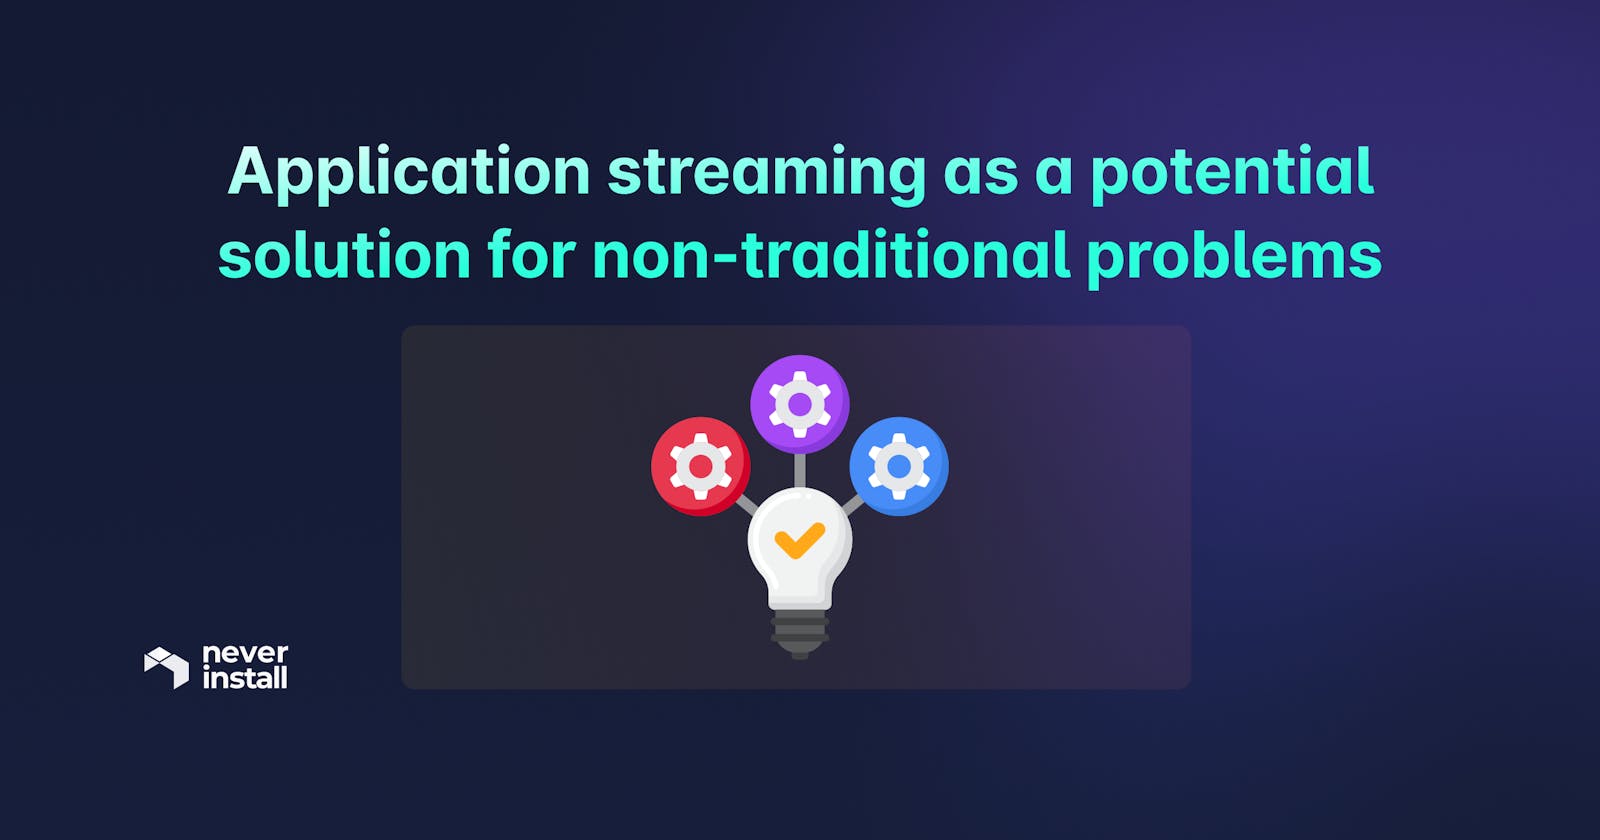 Application Streaming as a potential solution for non-traditional problems